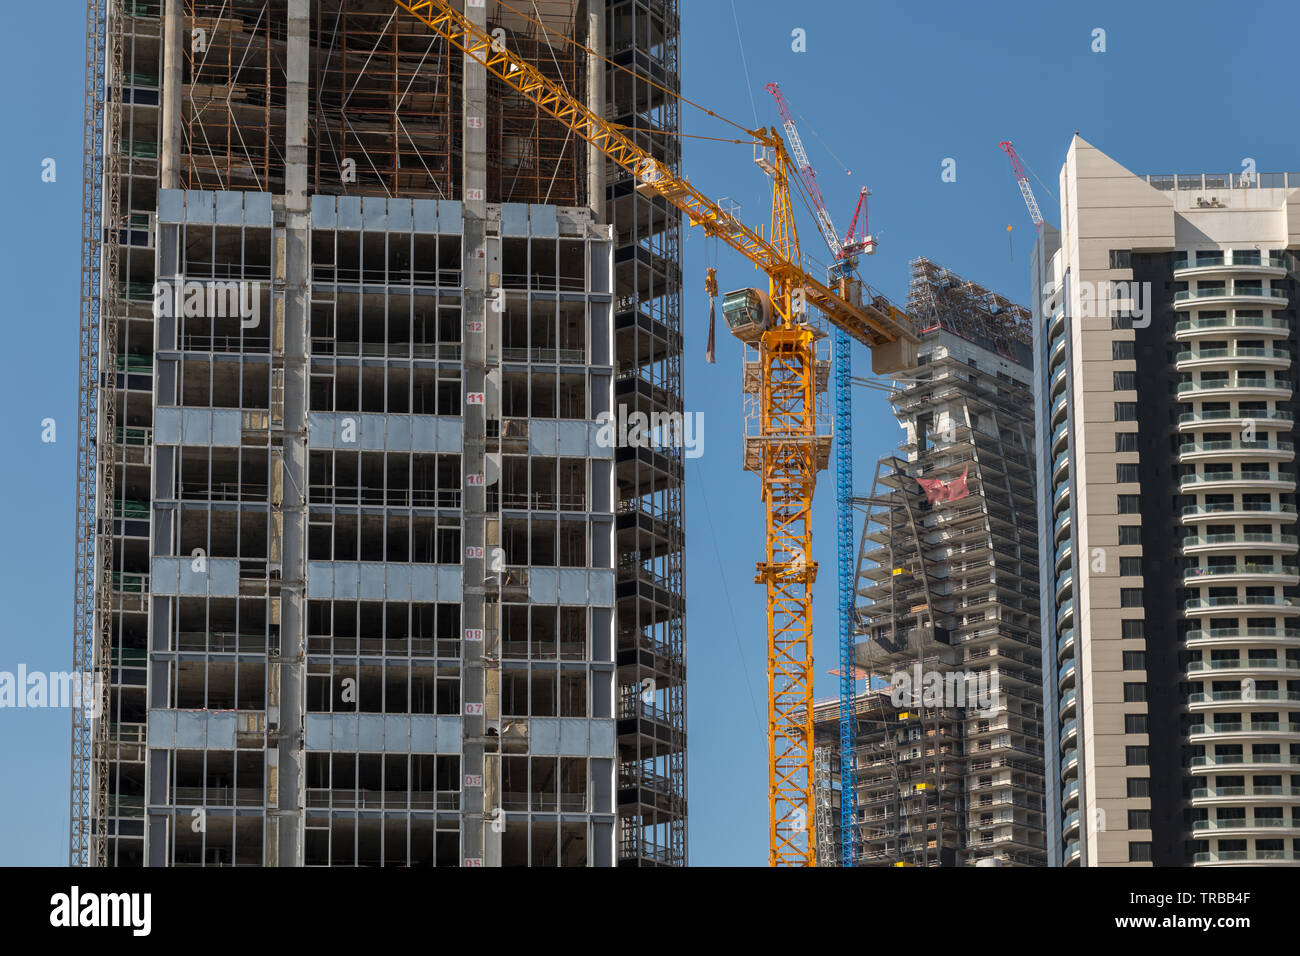 A yellow crane stands on a construction site where several skyscrapers are being built. Stock Photo